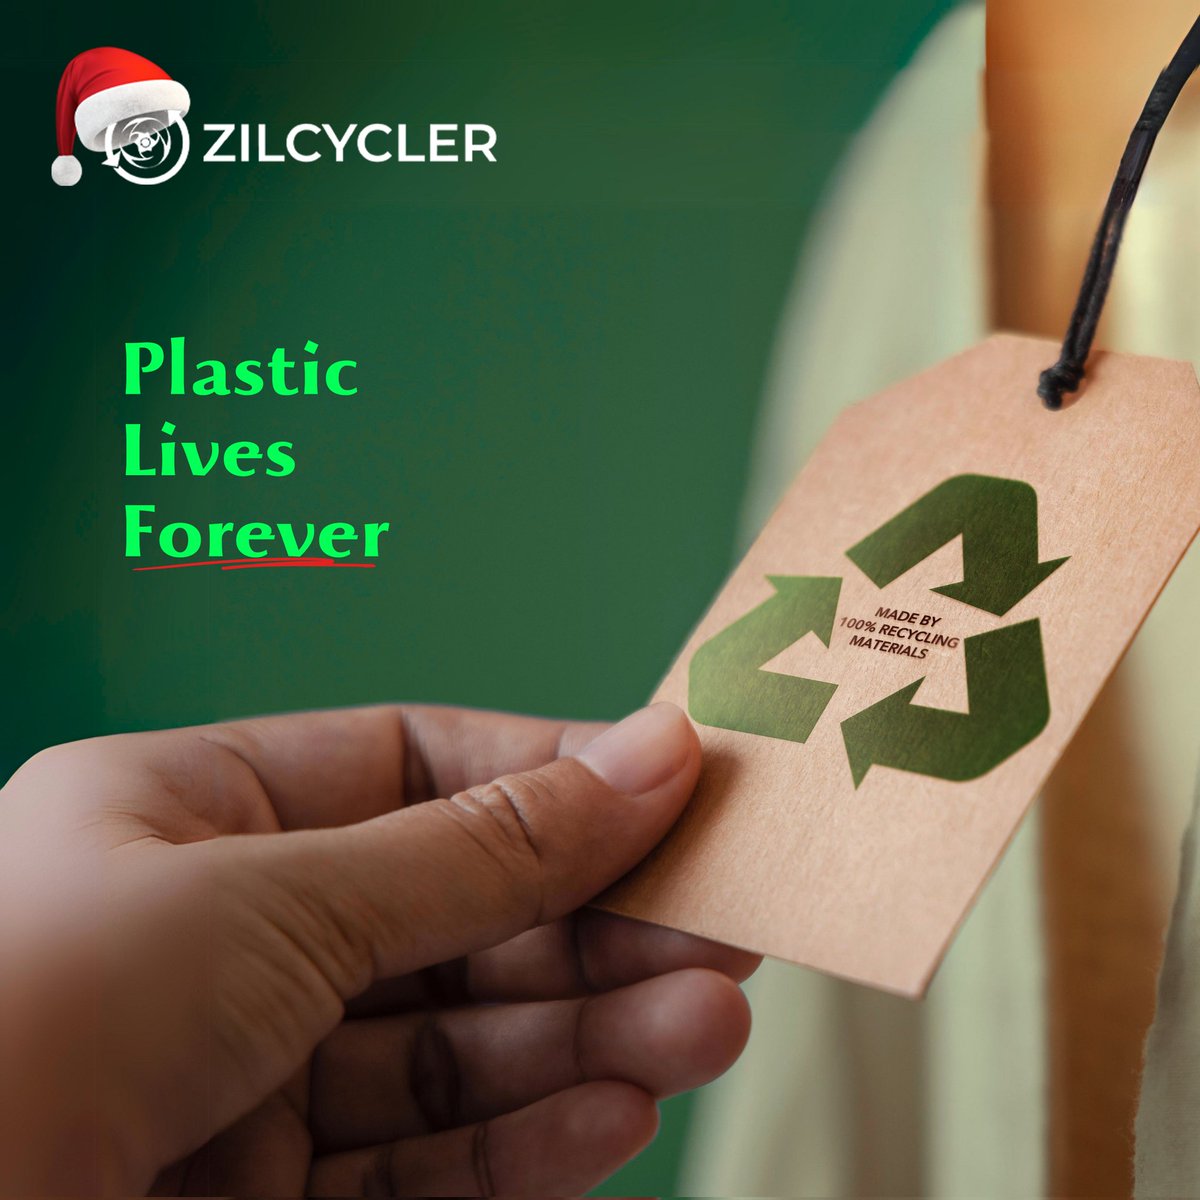 We're drifting into an era where our dresses are more of a commitment to a sustainable life than a fashion statement. ✨️

We llllove itttt! 🤭

#ZeroWaste #PlasticPollution #RecycledFashion #SustainableLiving #EcoFriendlyProducts #WasteManagement #Recycle #Zilcycler